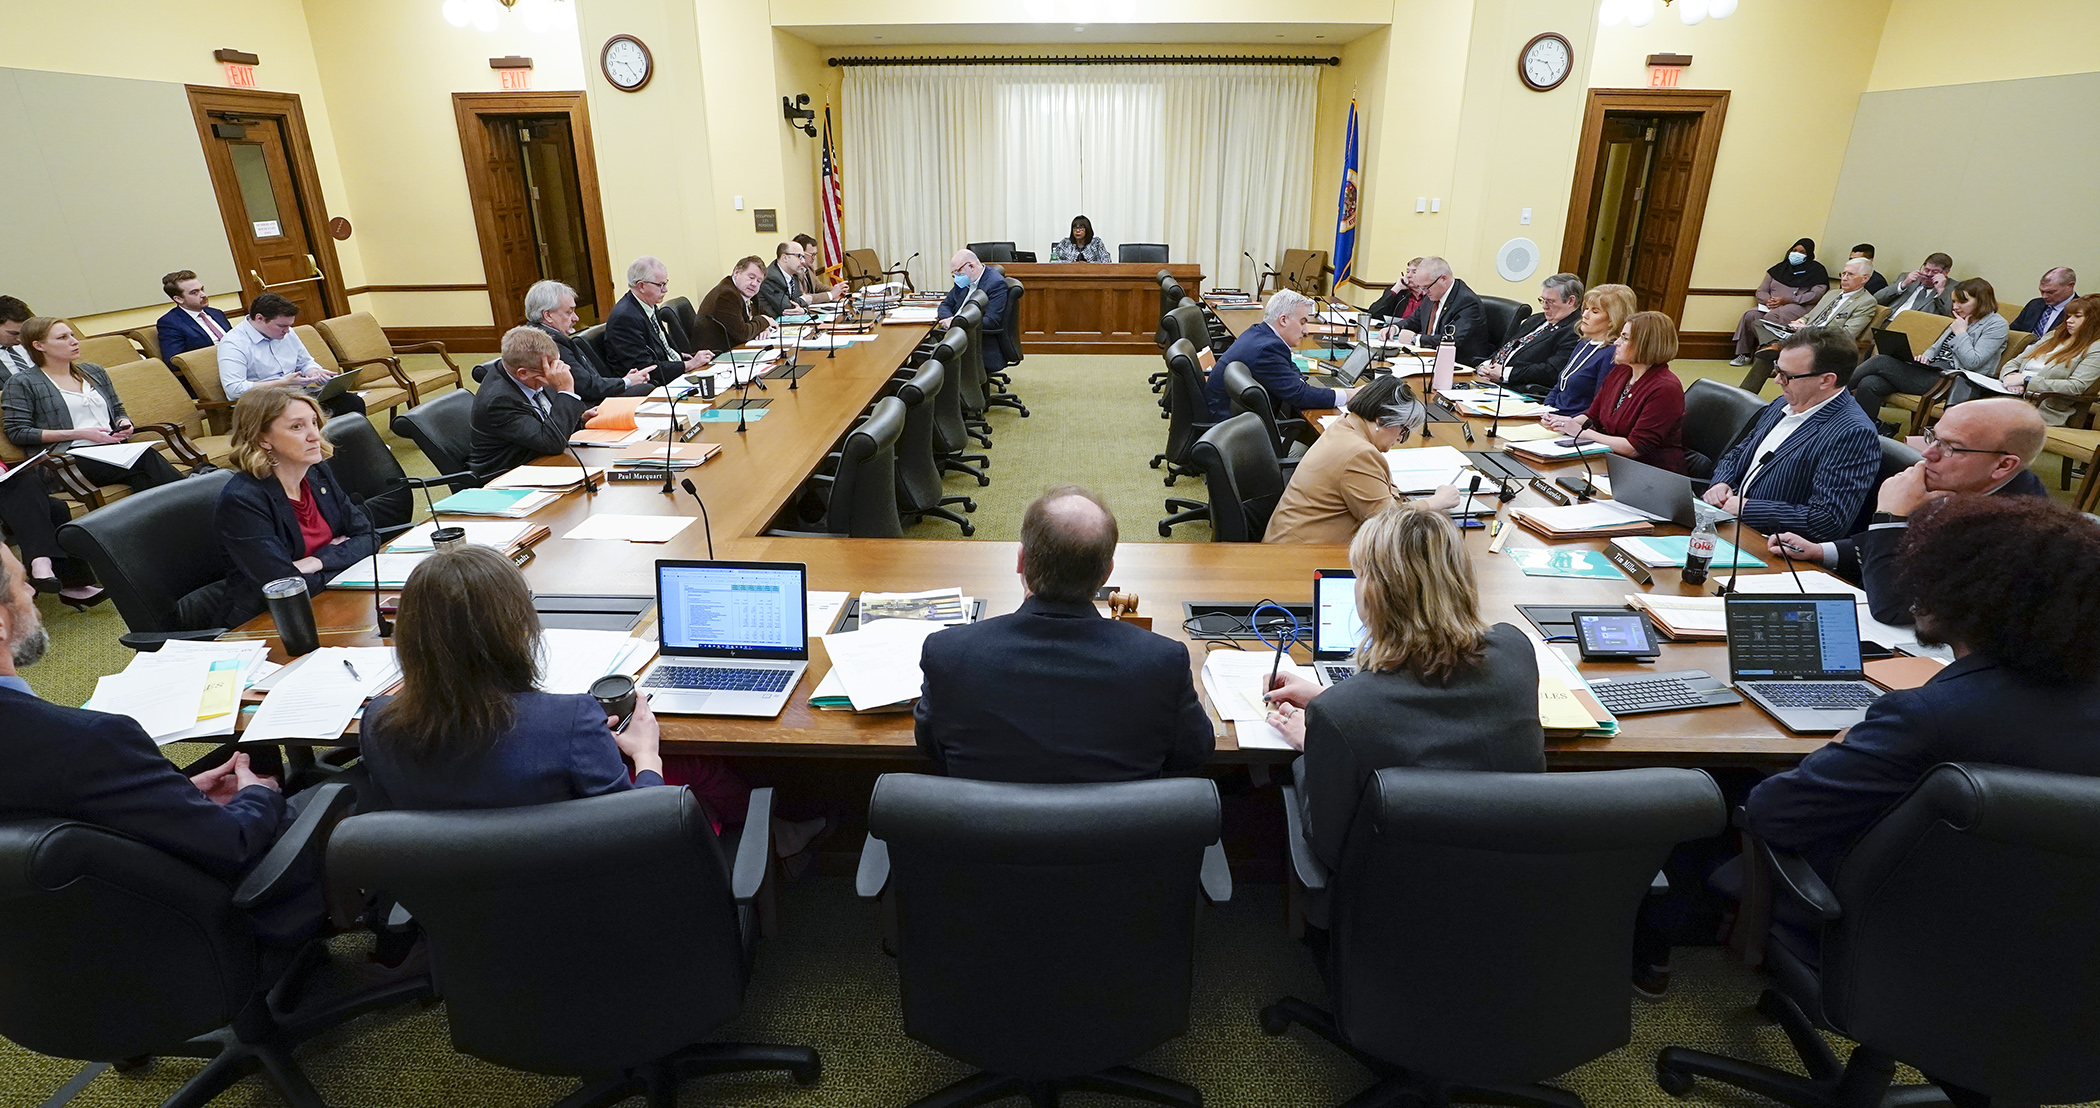 Members of the House Ways and Means Committee listen as Rep. Rena Moran, the committee chair, presents the House budget resolution during a hybrid committee meeting April 19. Photo by Paul Battaglia